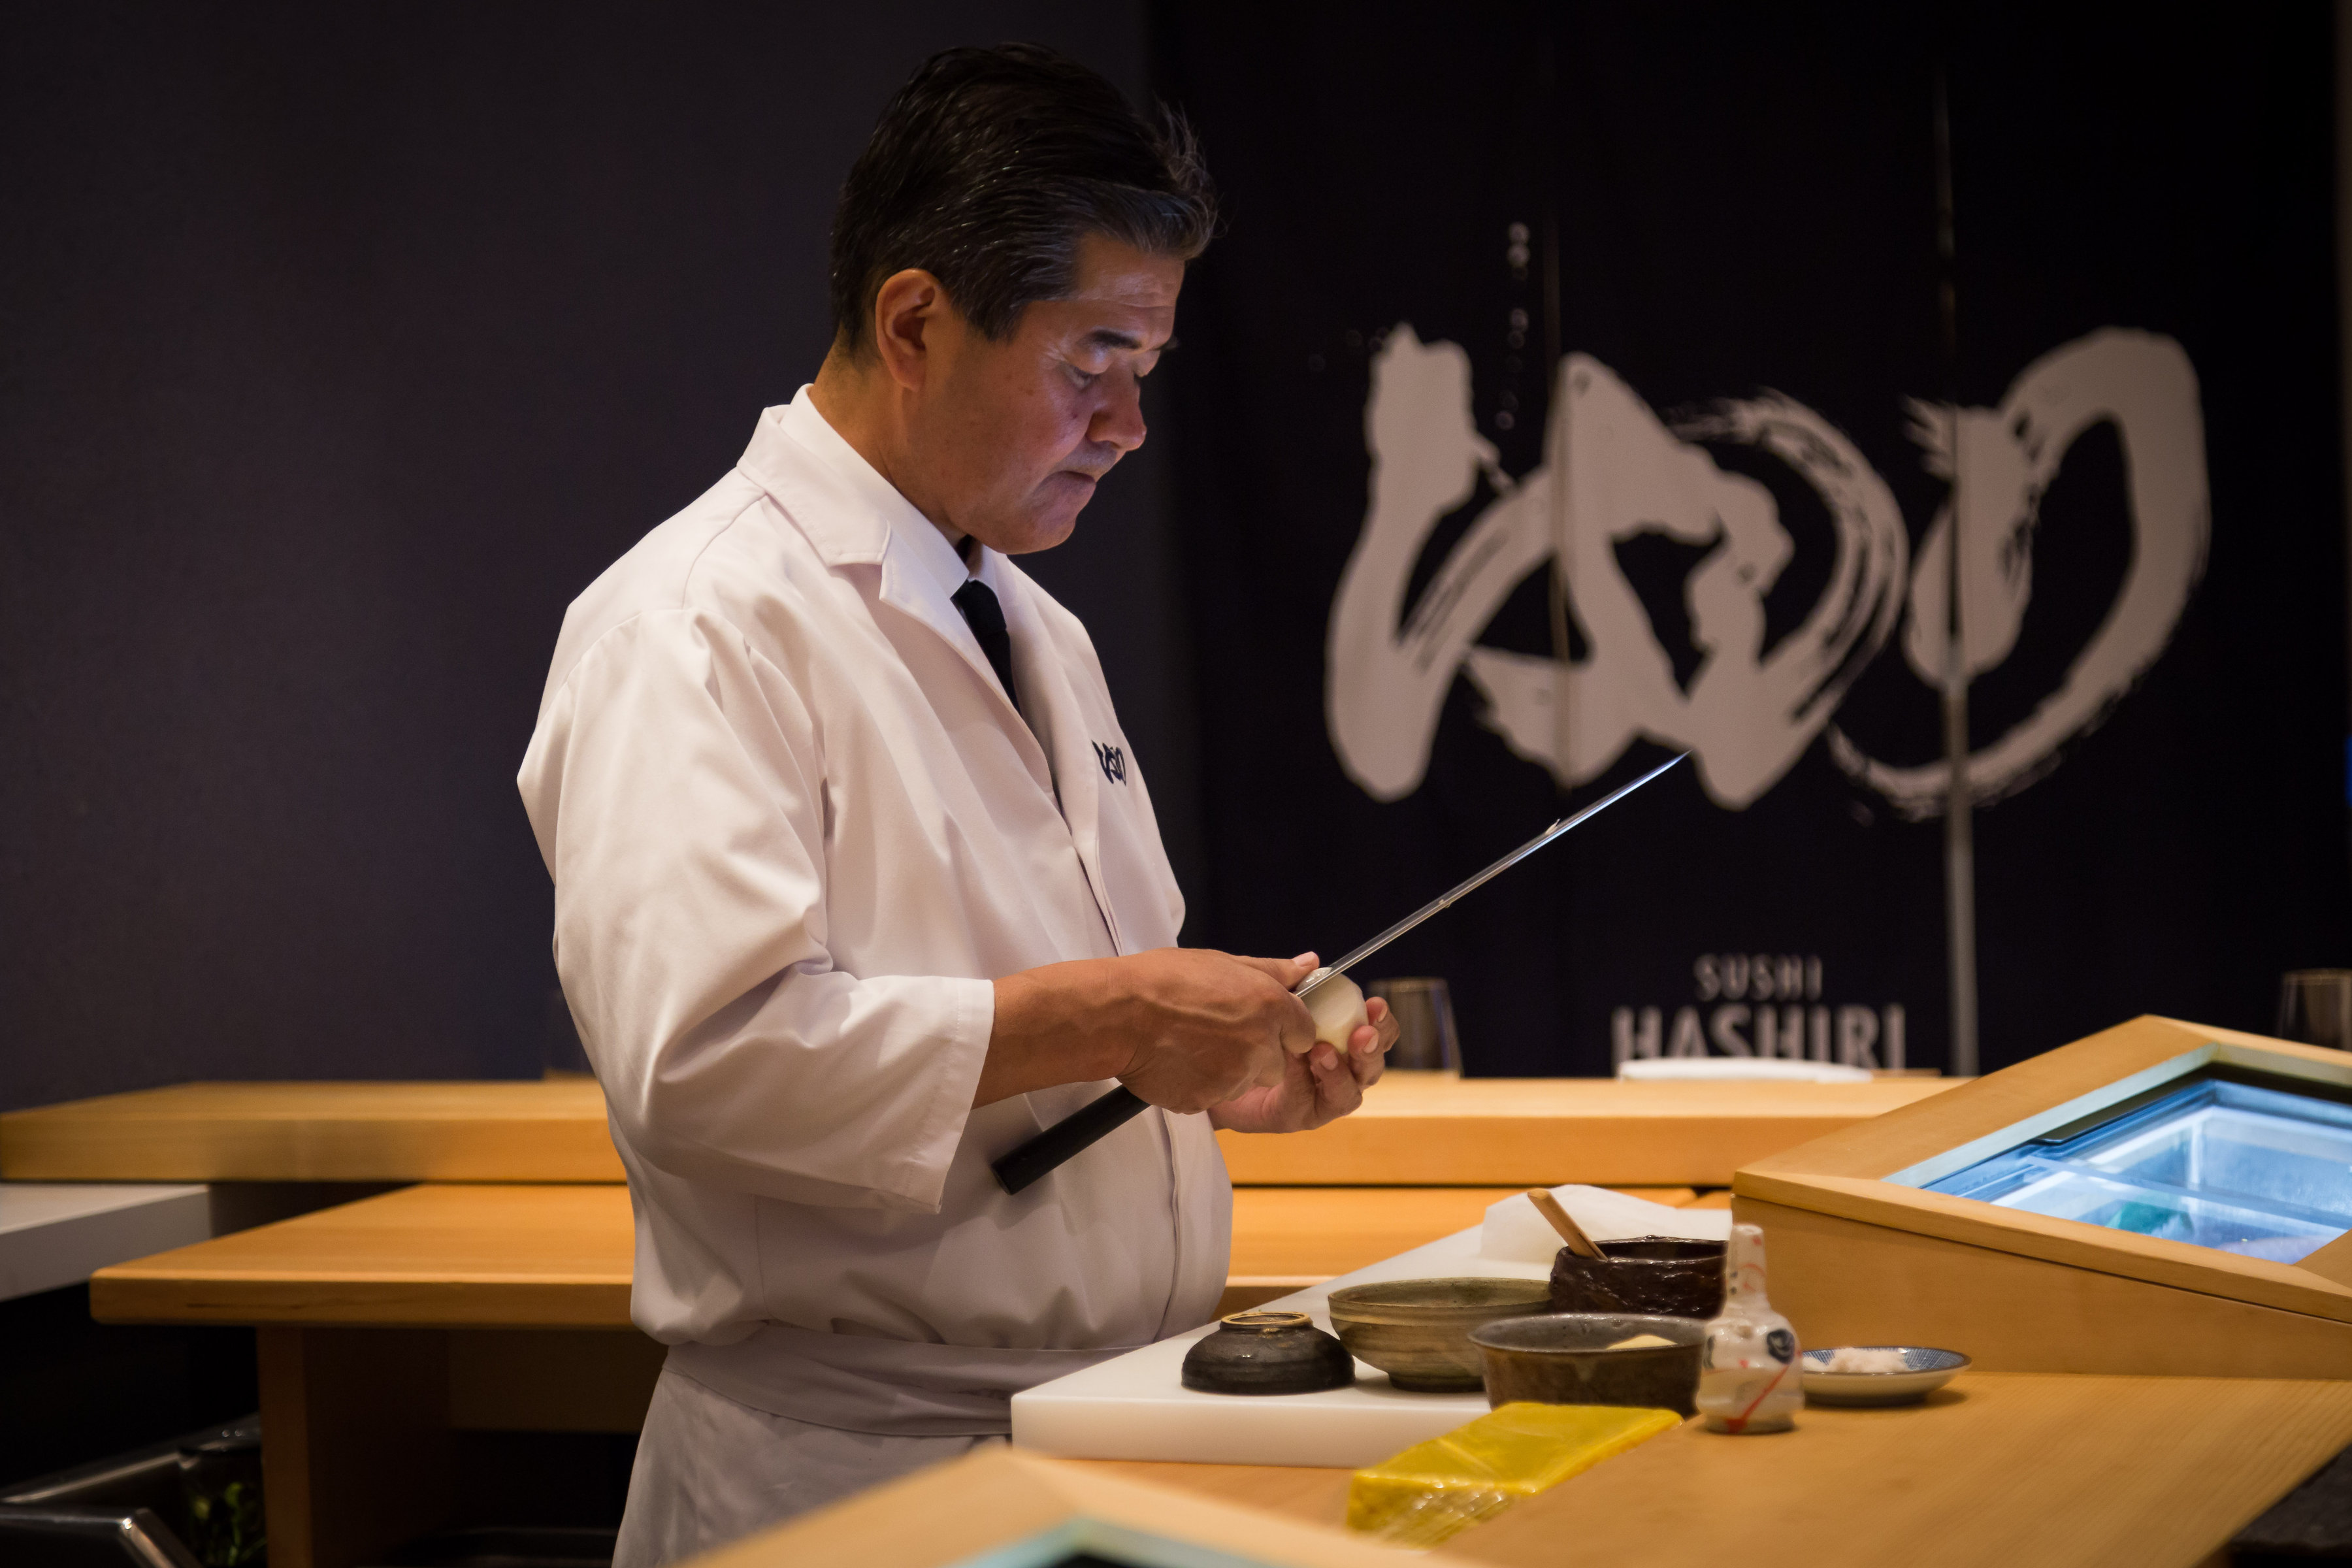 A sushi chef hard at work preparing the day's shipment of fresh fish from the Tsukiji Market